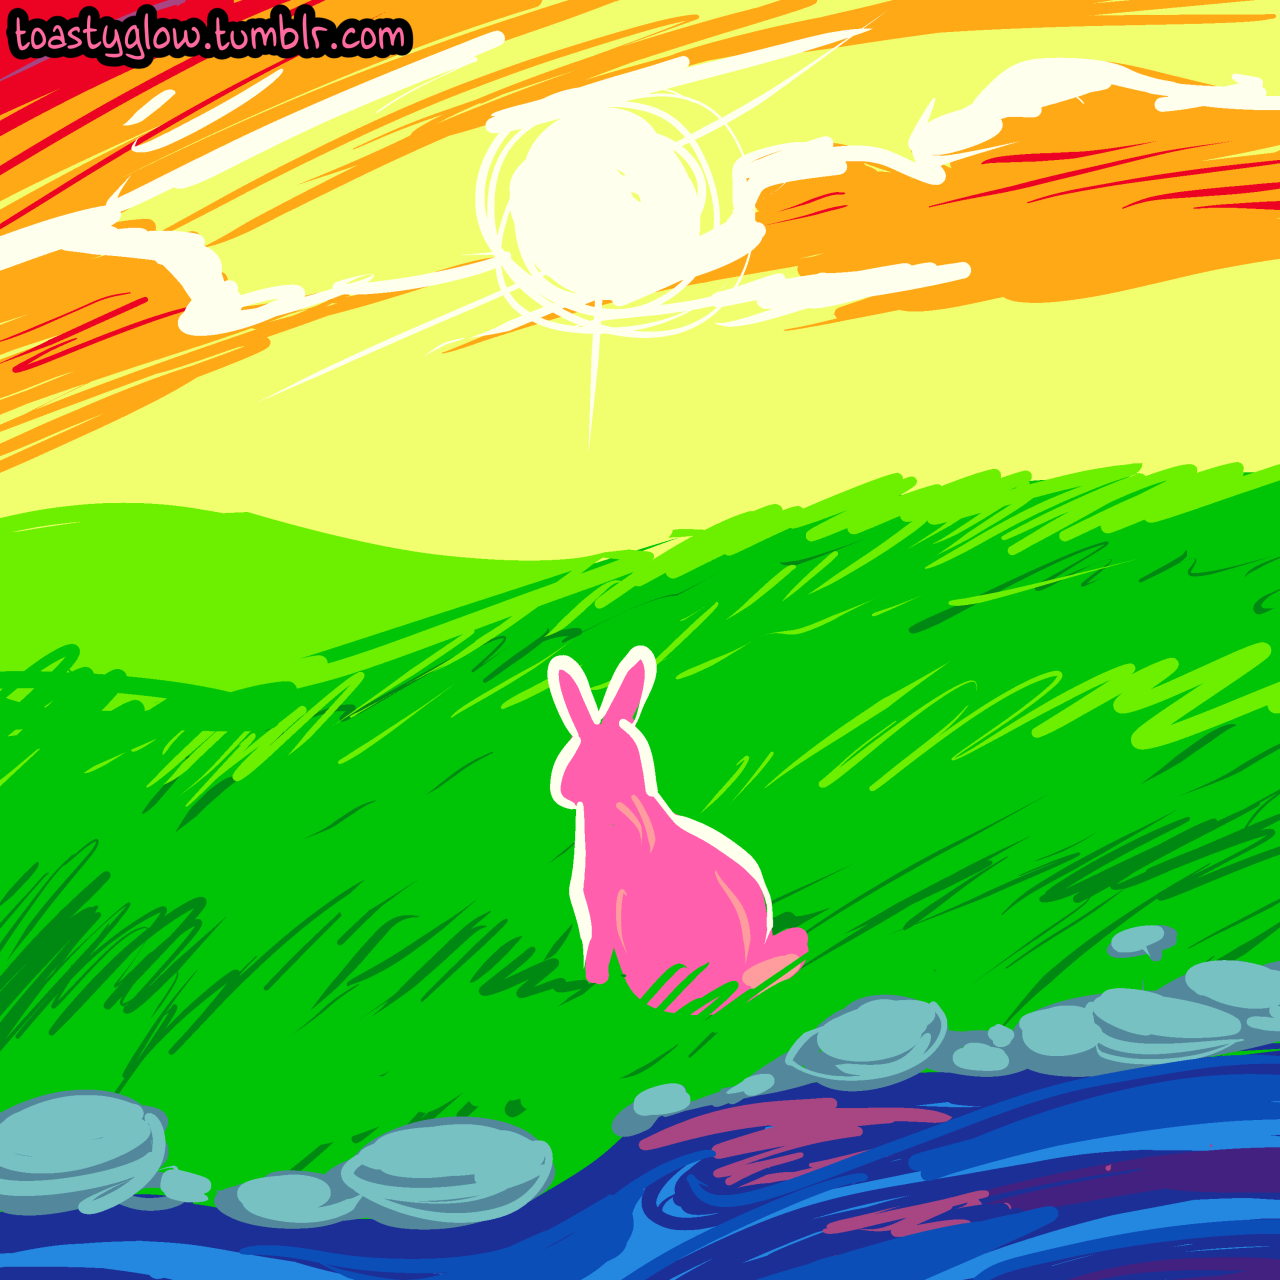 The smaller rabbit finds itself in a world of color, arrayed in a rainbow.  It is now entirely pink.